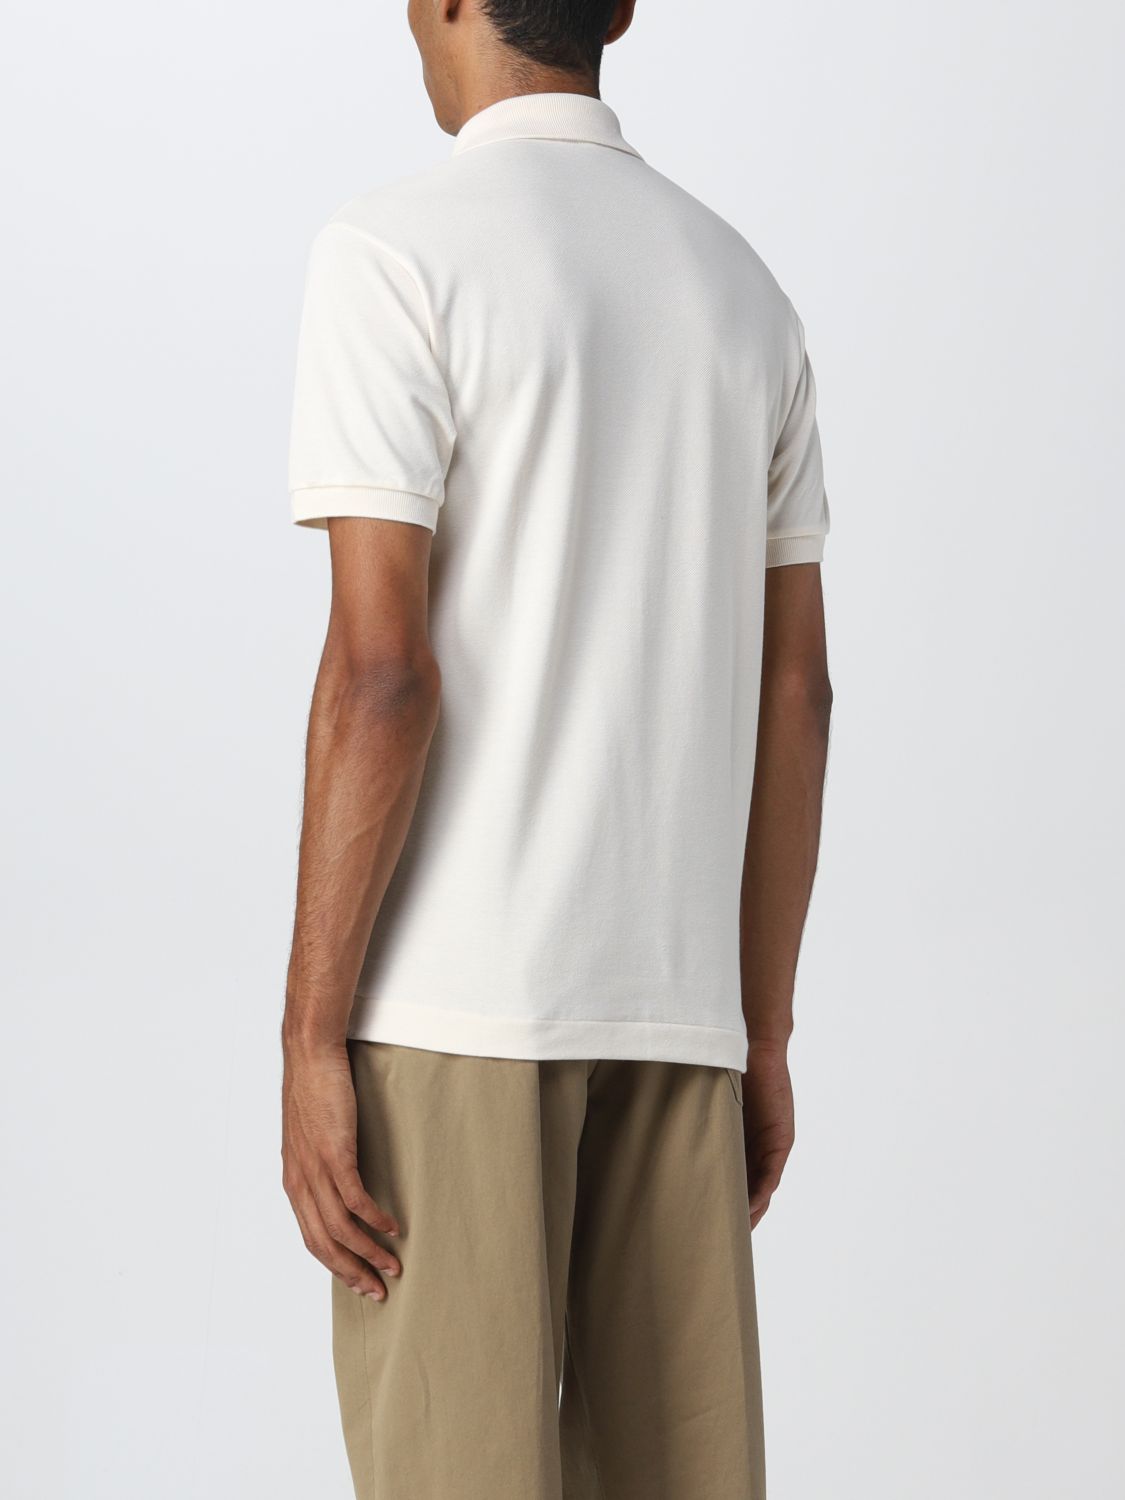 LACOSTE: polo shirt for man - Cream | Lacoste polo shirt 1212 online on ...